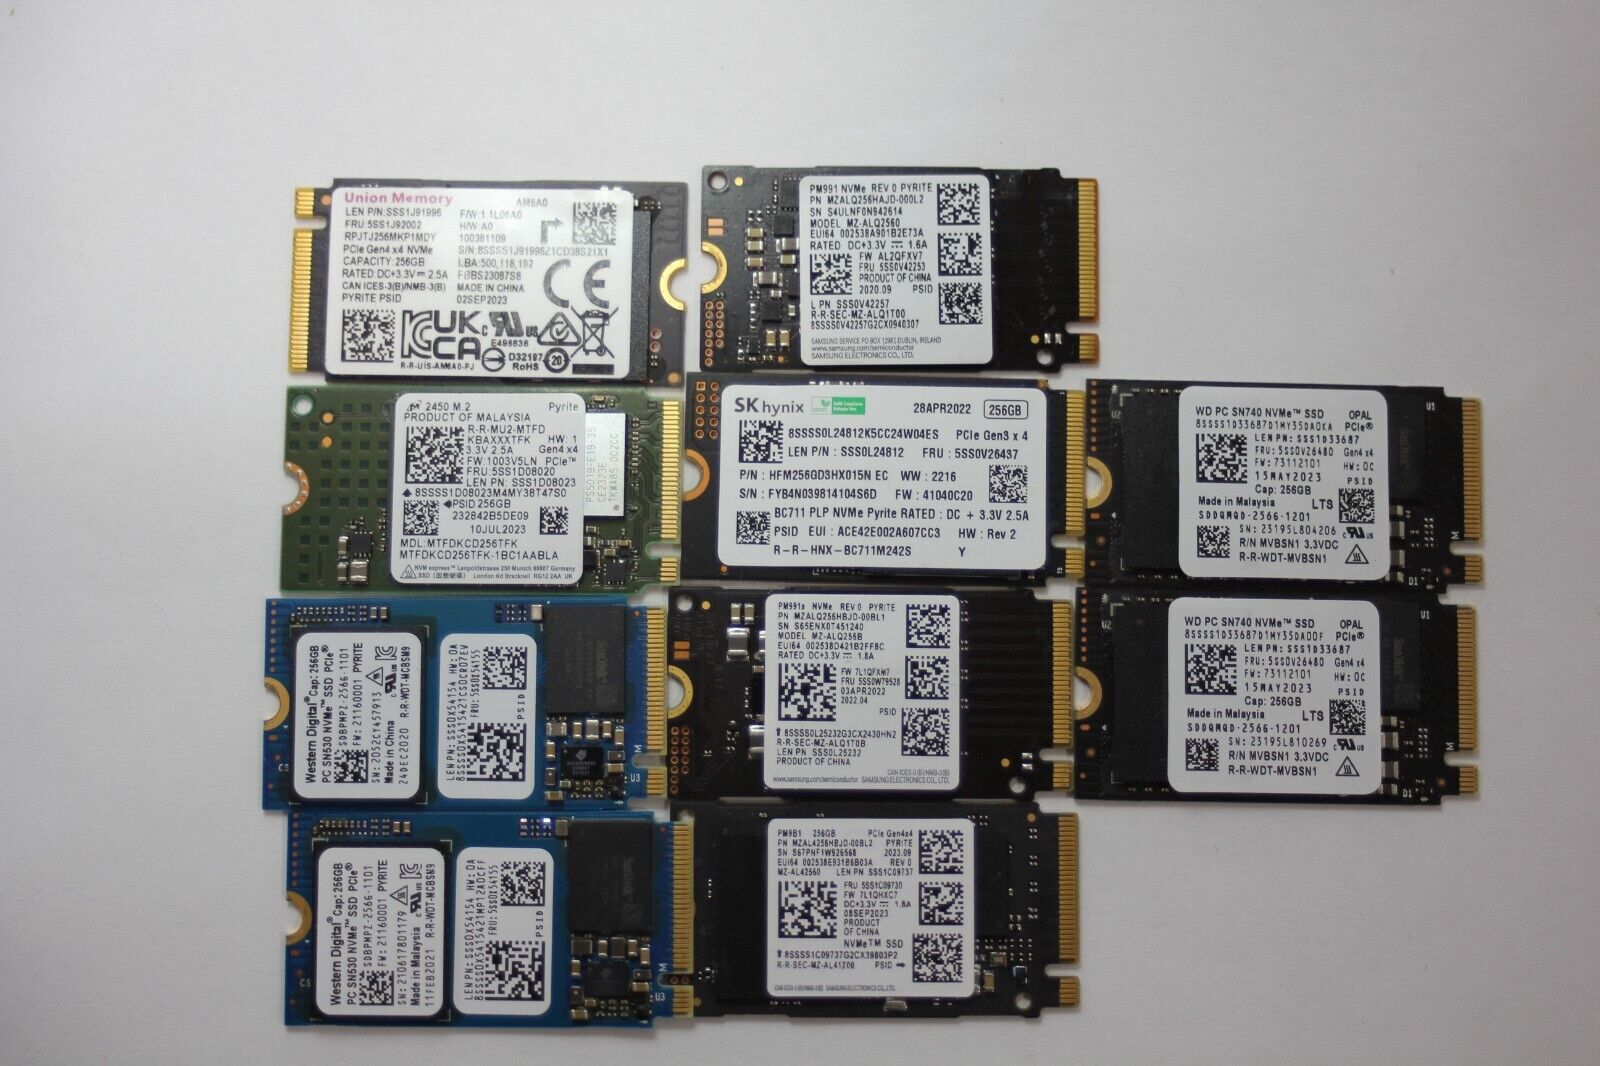 LOT OF 5: 256GB M.2 PCIE NVME 2242 SSD Major Brands WD, SK Hynix, Samsung,Micron